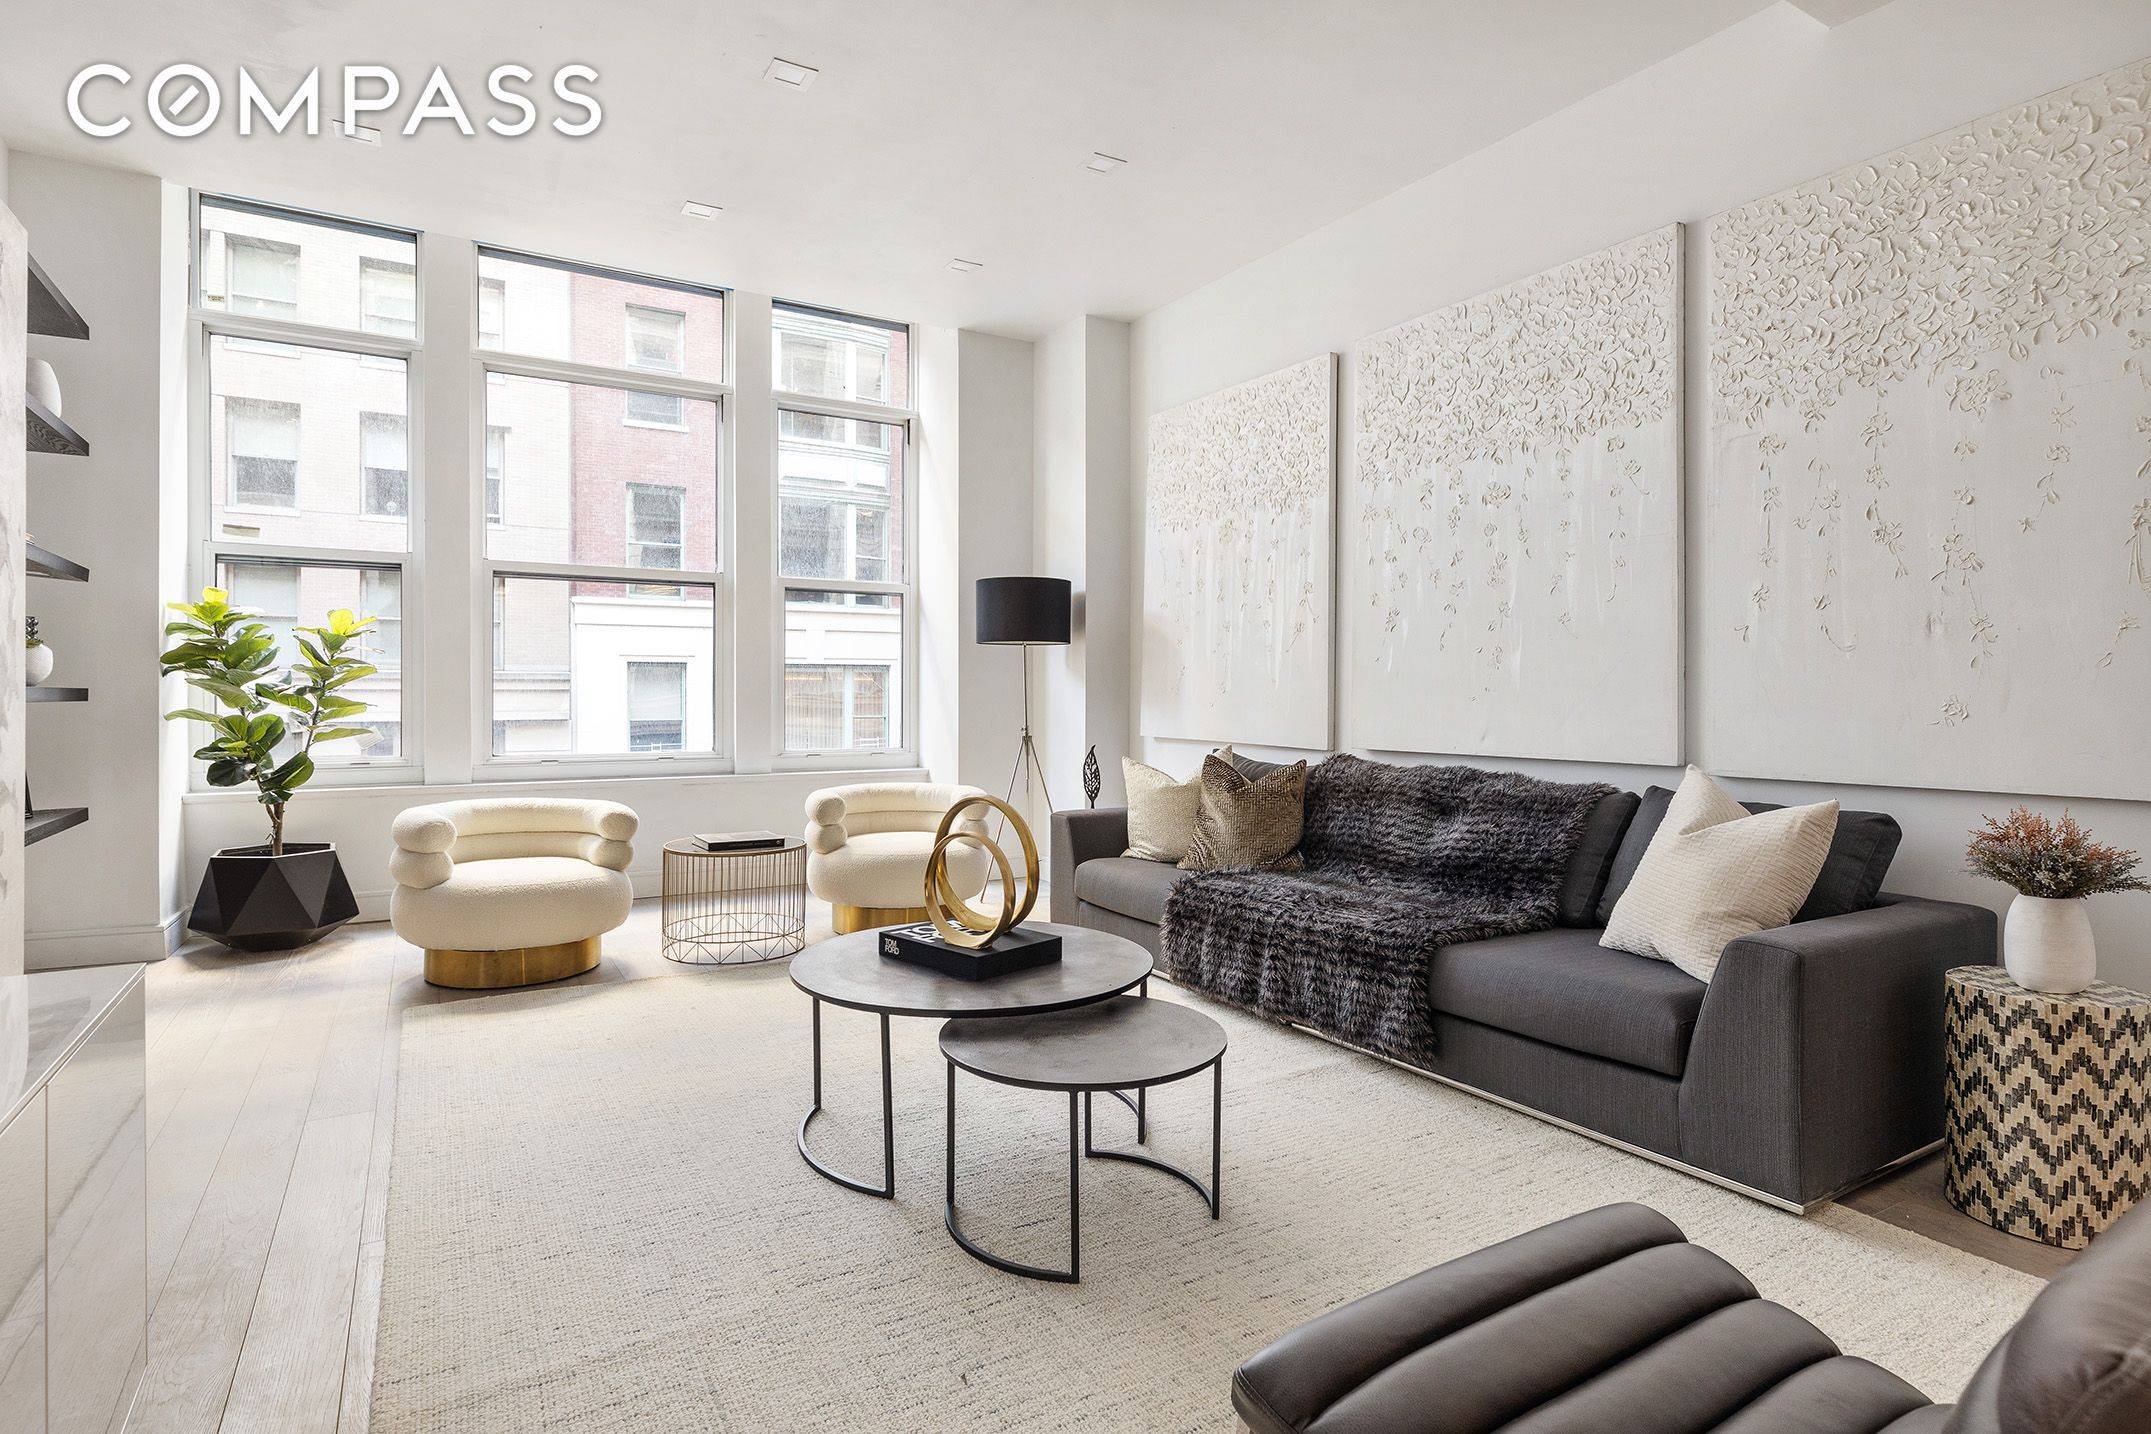 THE FLATIRON LOFT HOUSE 34 West 21st Street combines the best of townhouse and loft living in this brand new one of a kind, ground up construction, steel and concrete ...